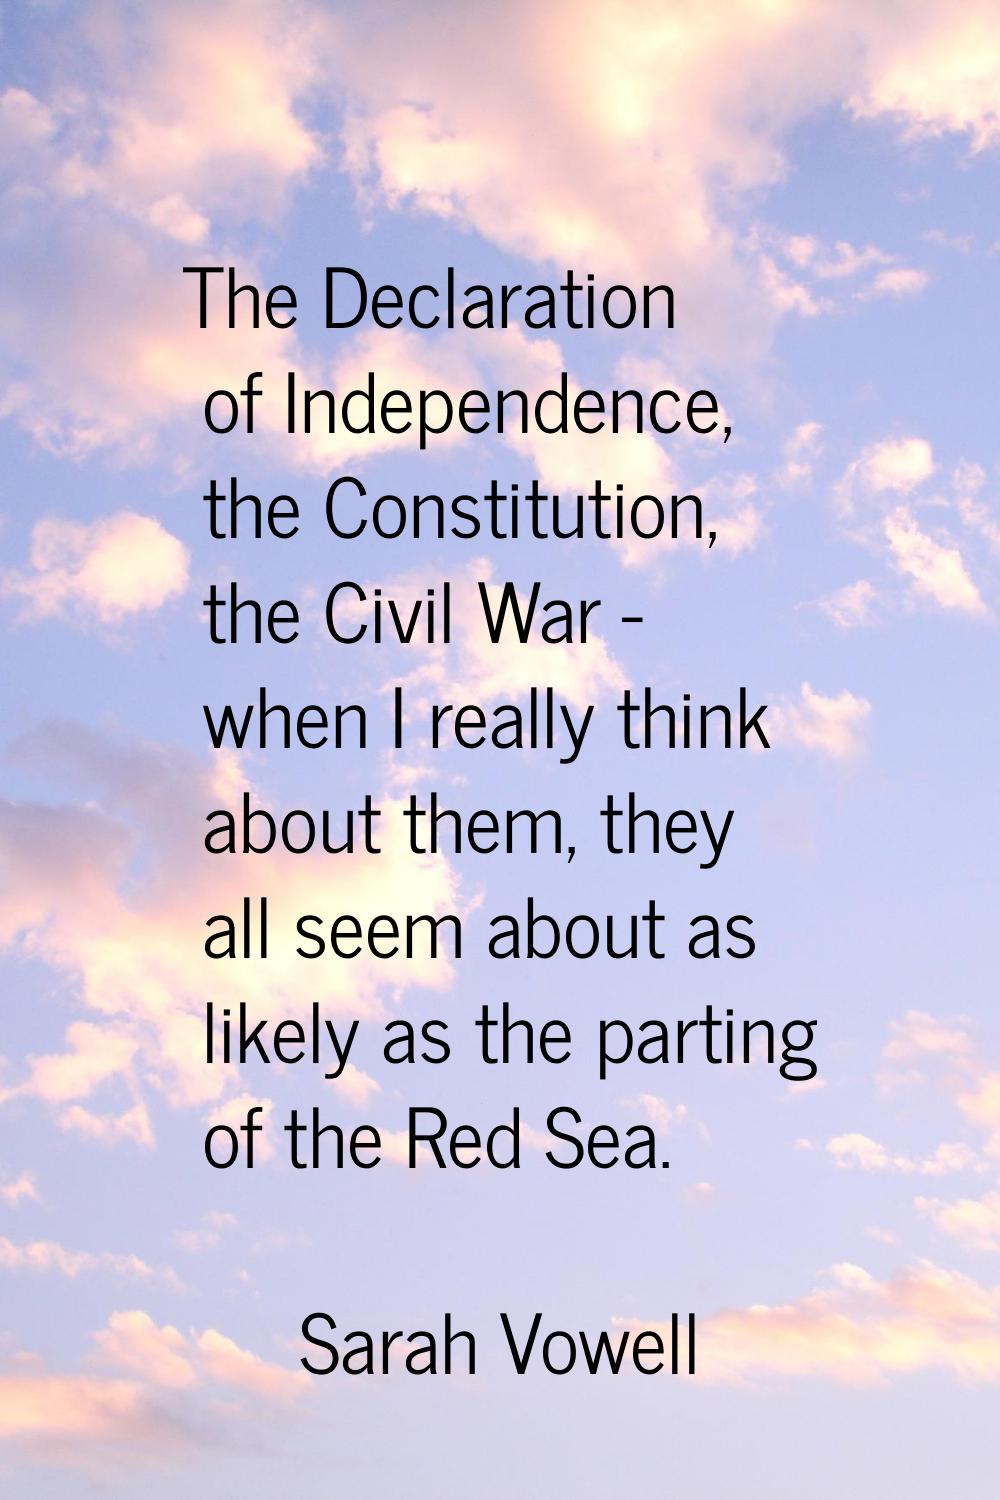 The Declaration of Independence, the Constitution, the Civil War - when I really think about them, 